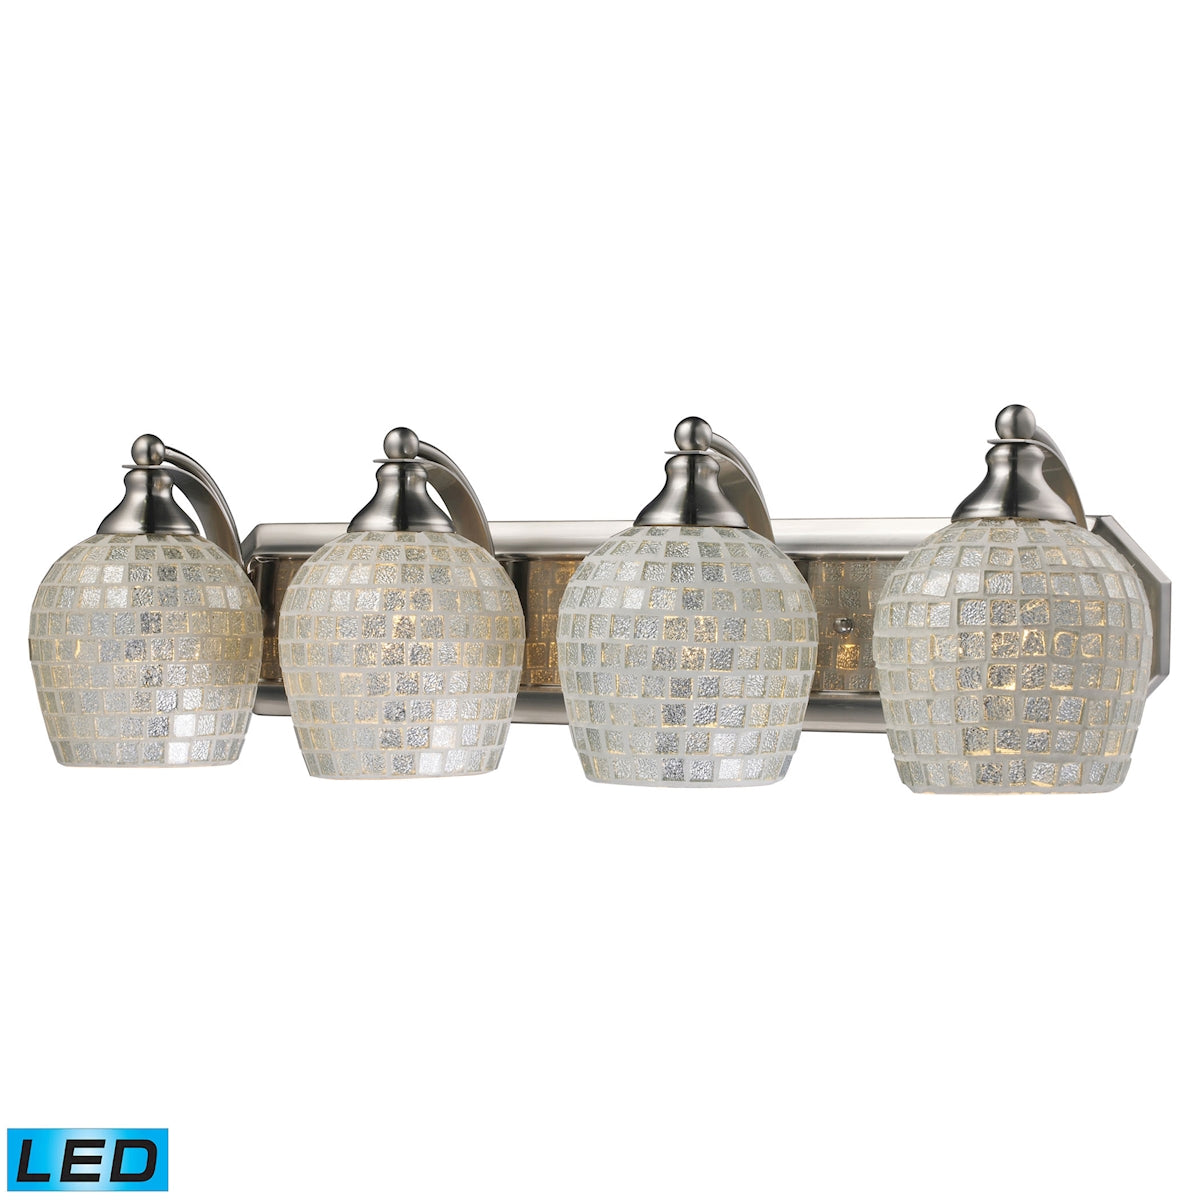 ELK Lighting 570-4N-SLV-LED Mix-N-Match Vanity 4-Light Wall Lamp in Satin Nickel with Silver Glass - Includes LED Bulbs